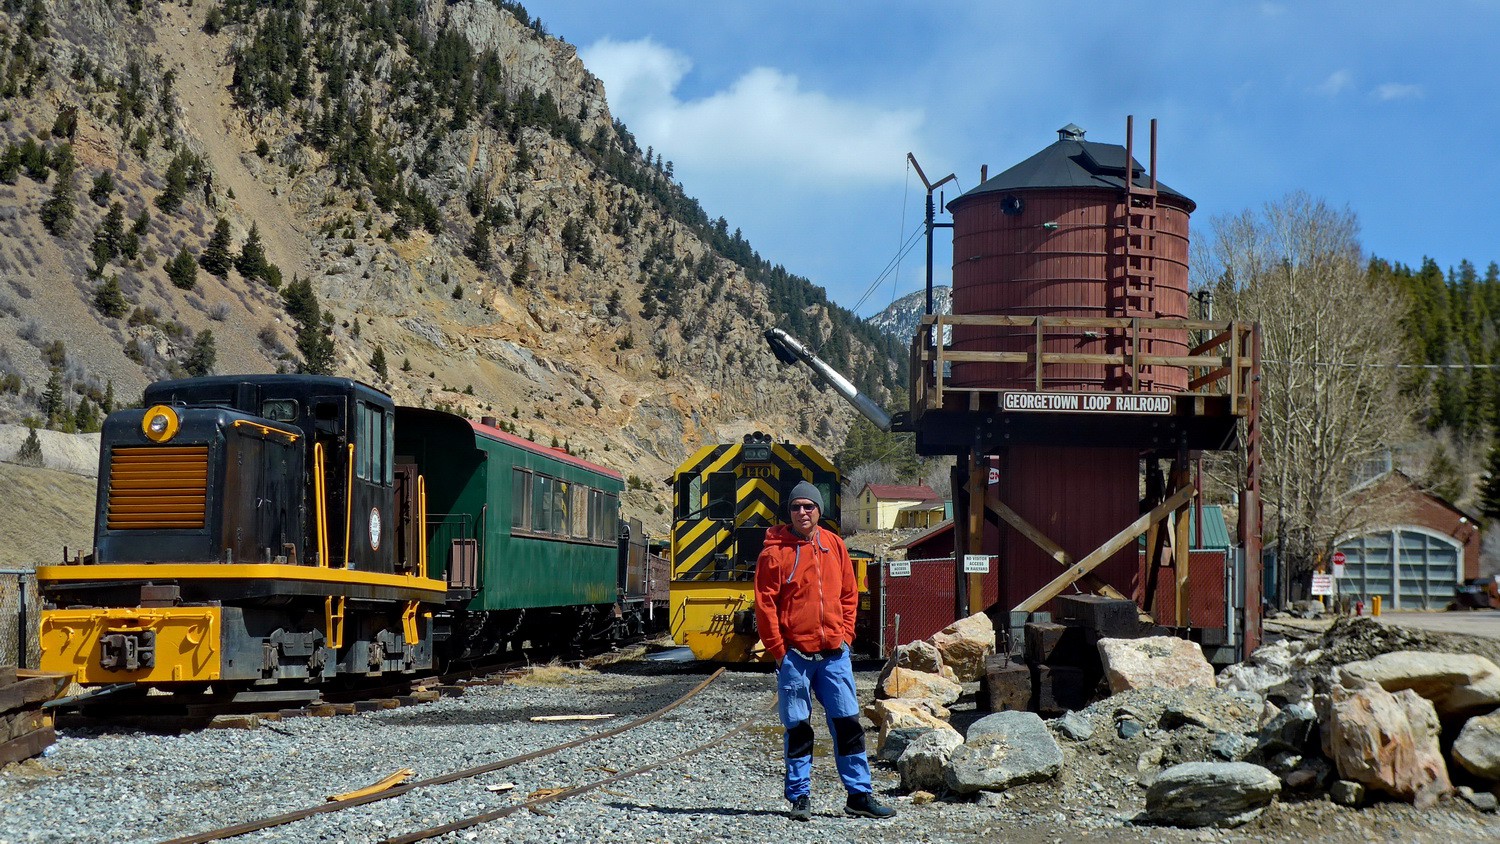 Alfred in the Morrison Railroad Center of the little mining town Silver Plume